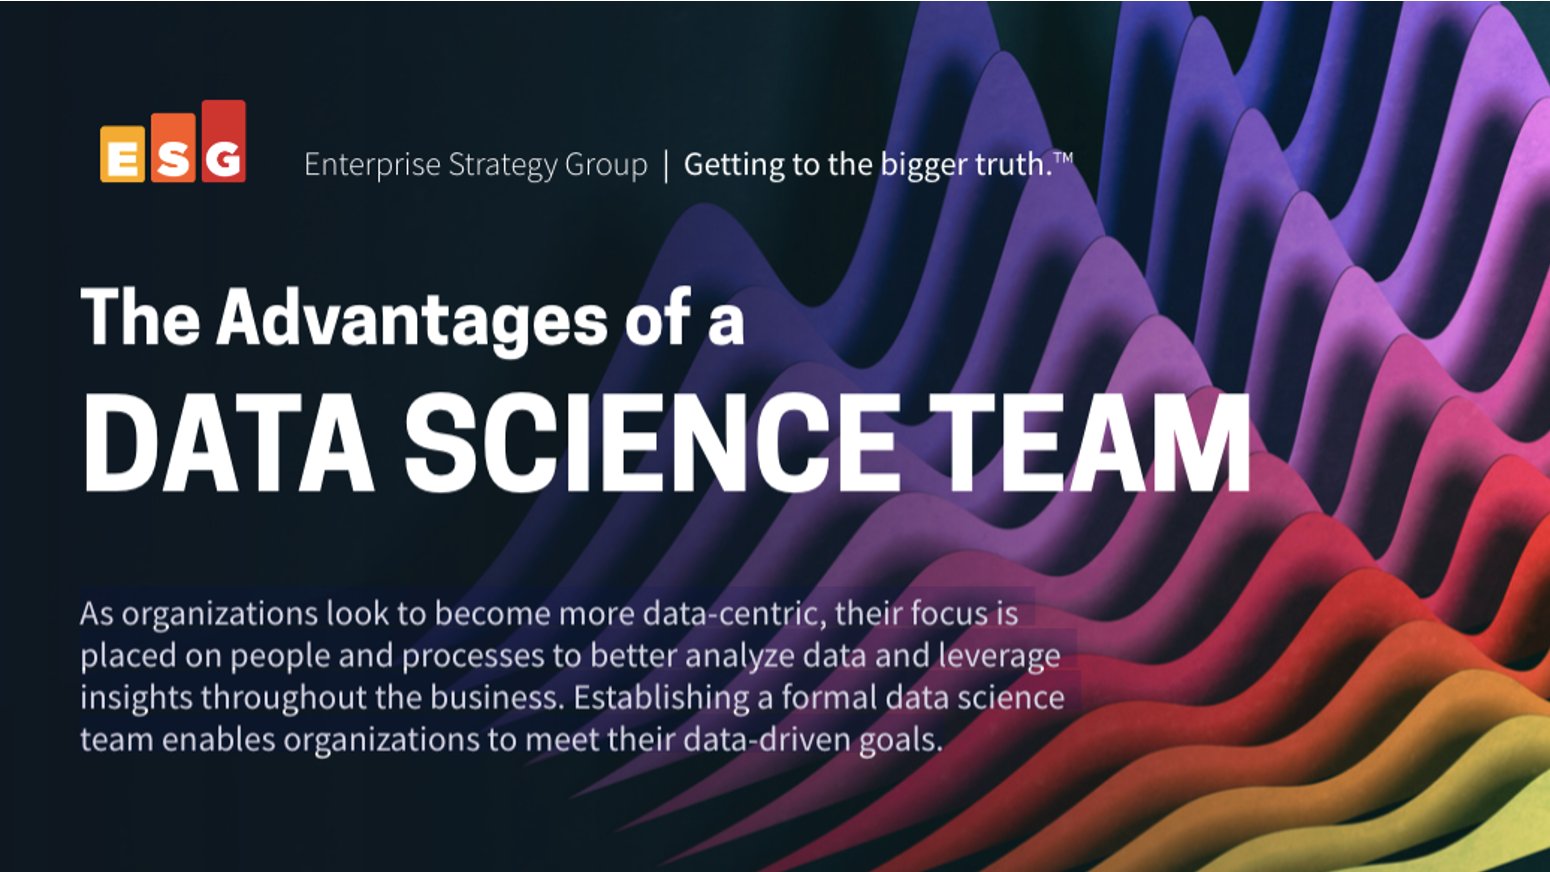 The Advantages of a Data Science Team